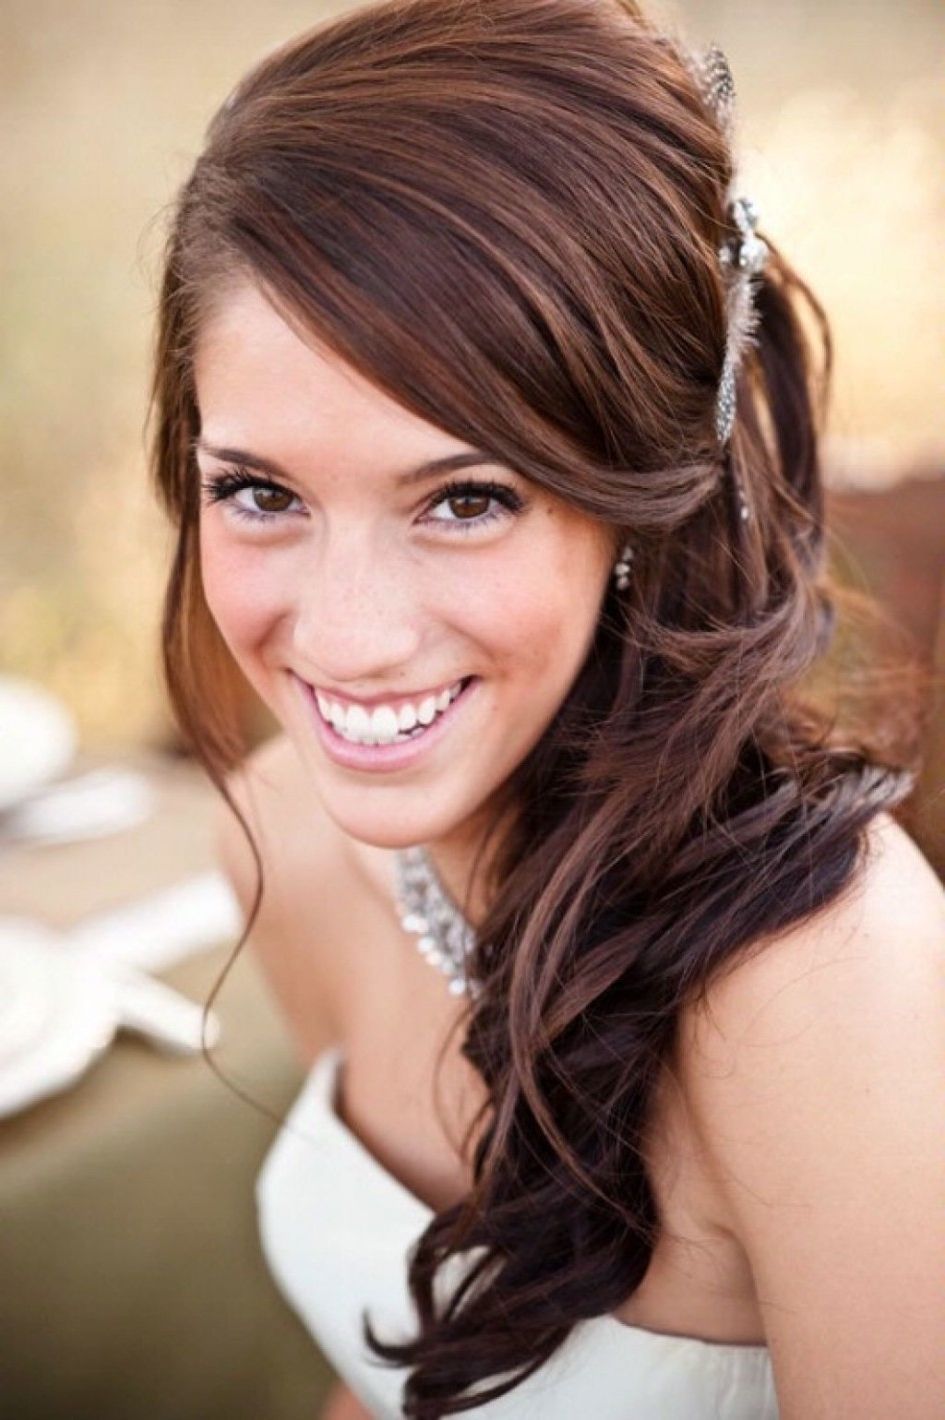 Newest Wedding Hairstyles With Hair Accessories Throughout Wedding Hairstyles Ideas: Side Ponytail Curly Long Hair Casual (View 13 of 15)